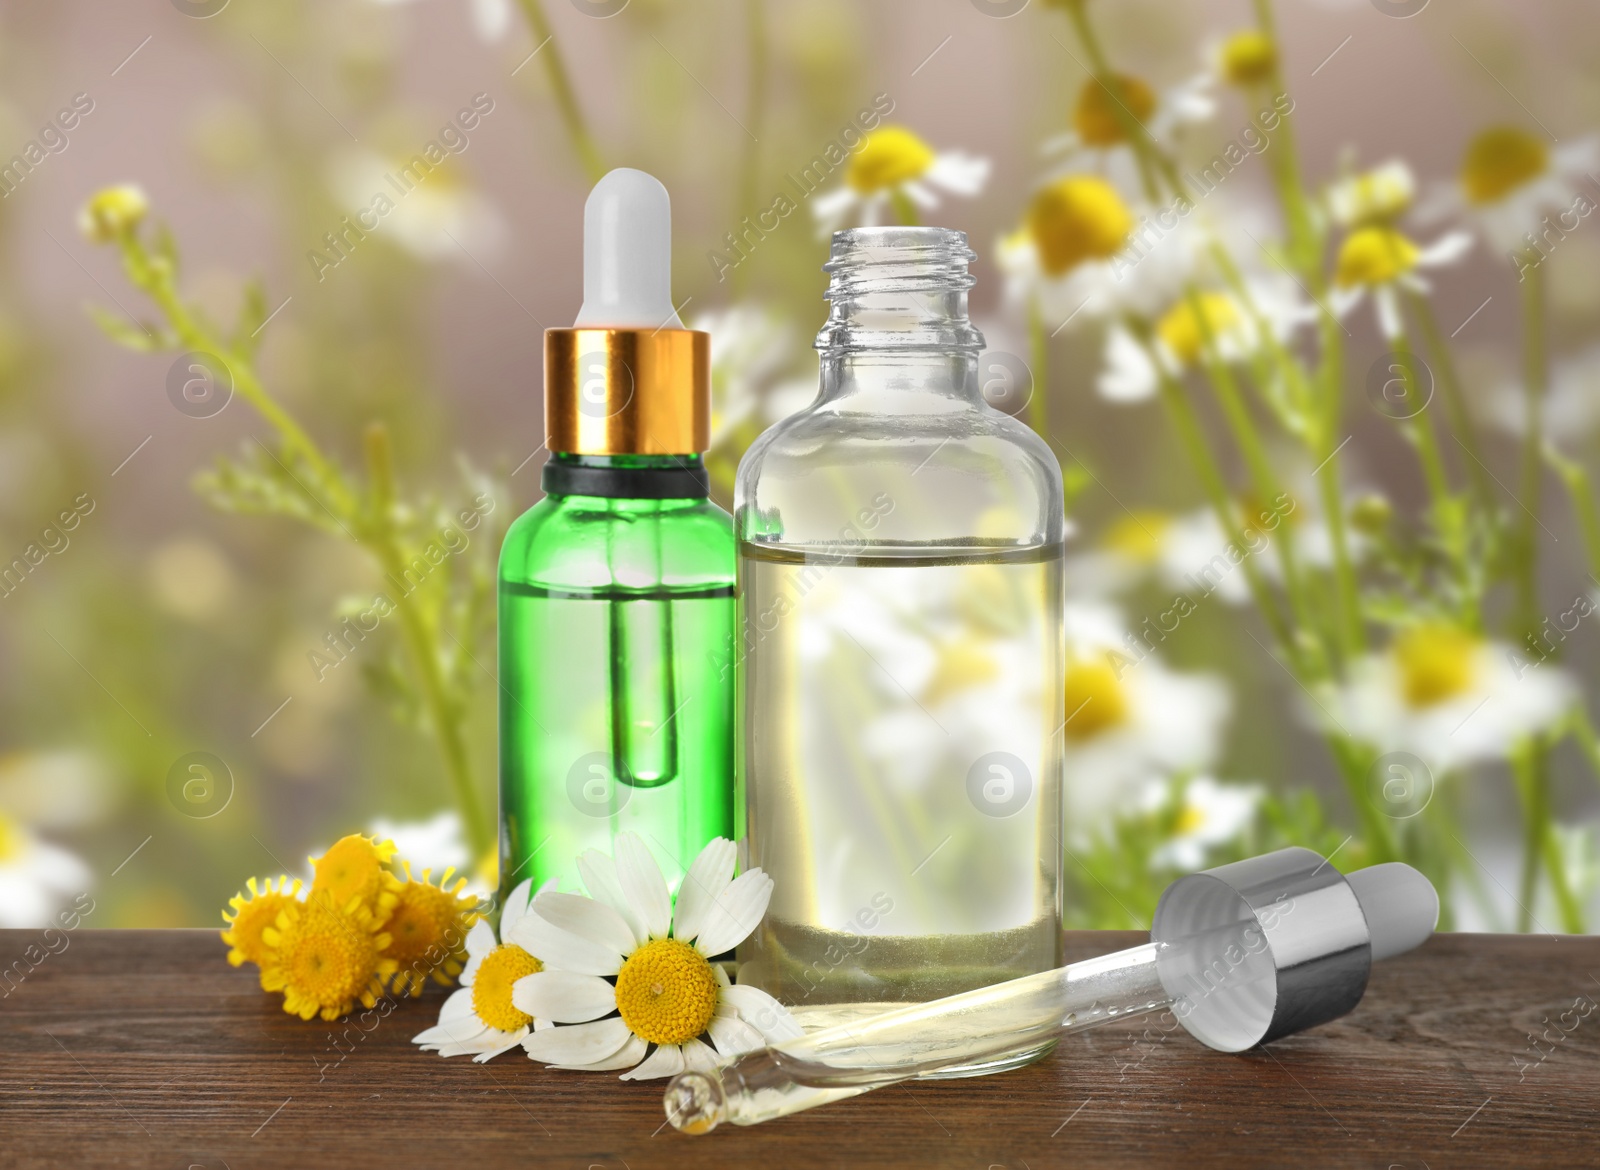 Image of Bottles of essential oils and flowers on wooden table against blurred background